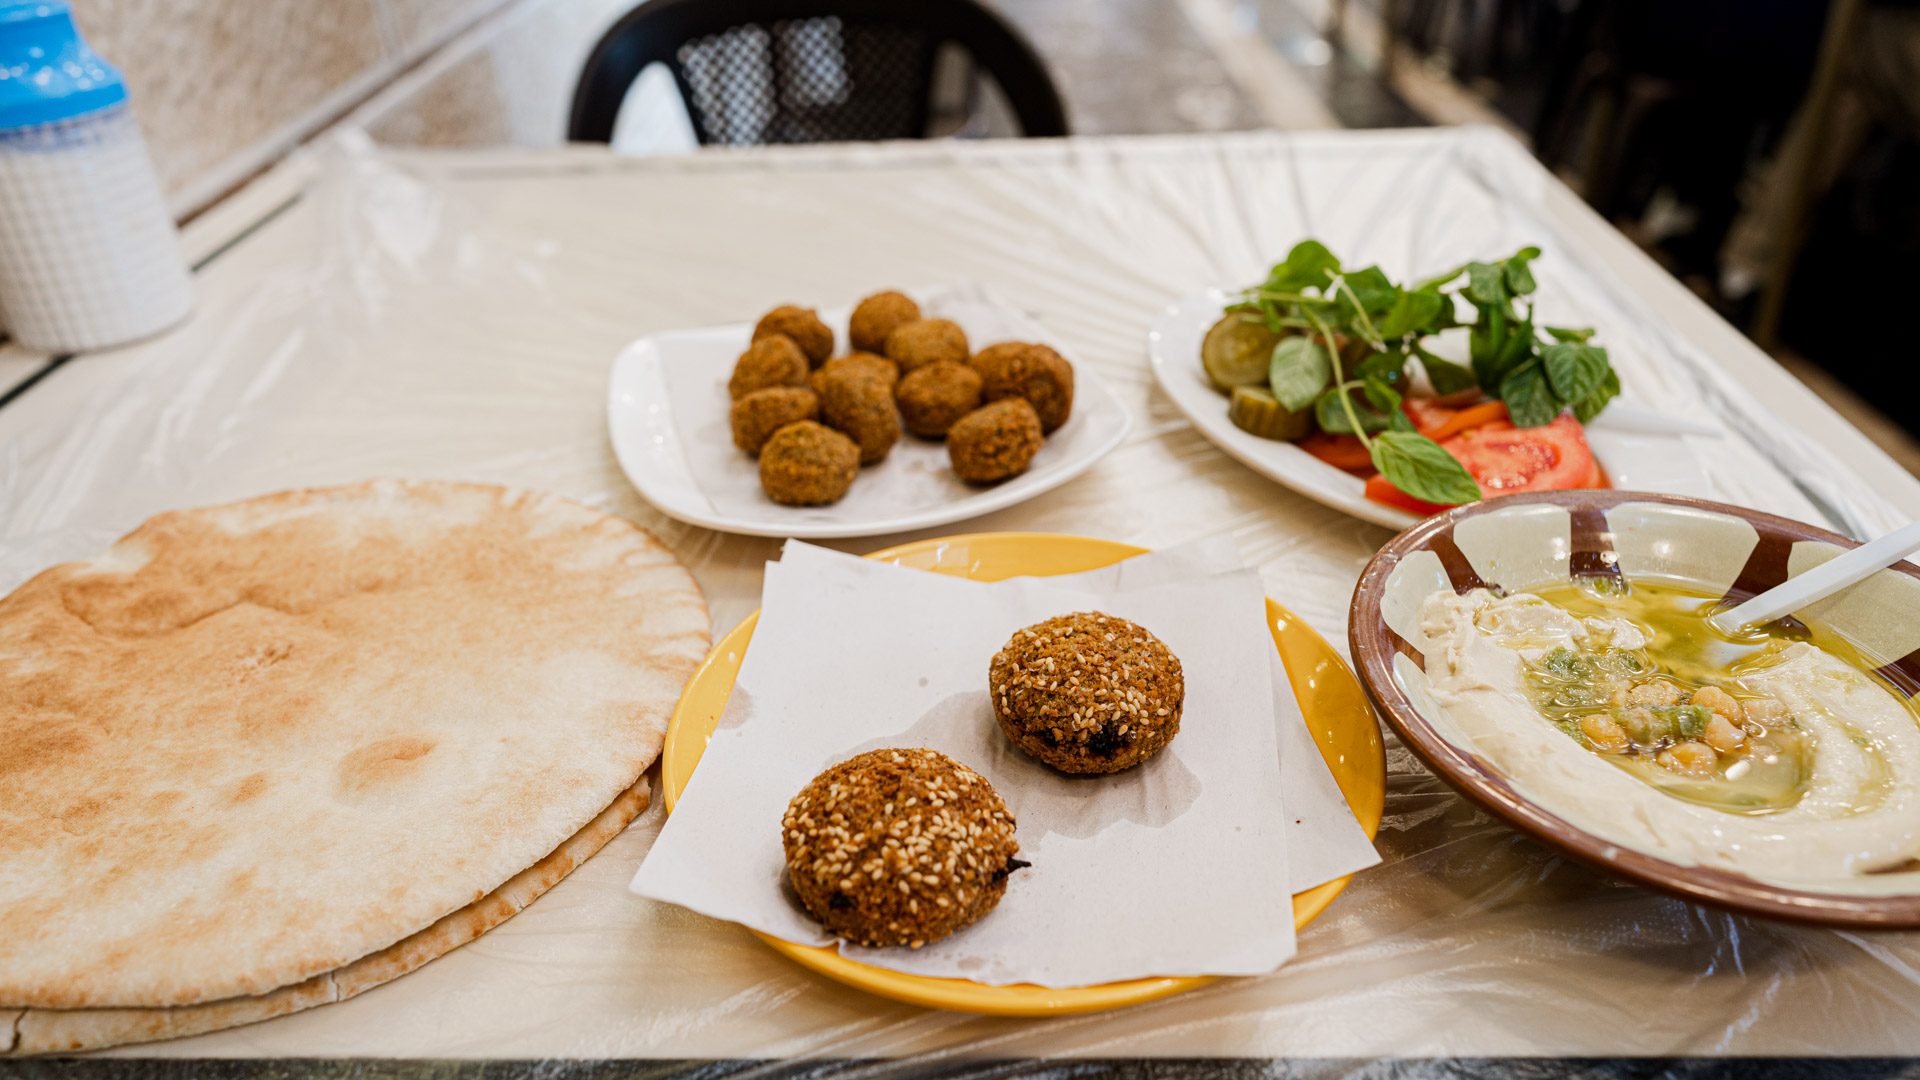 Falafel and hummus from Hashem's Restaurant